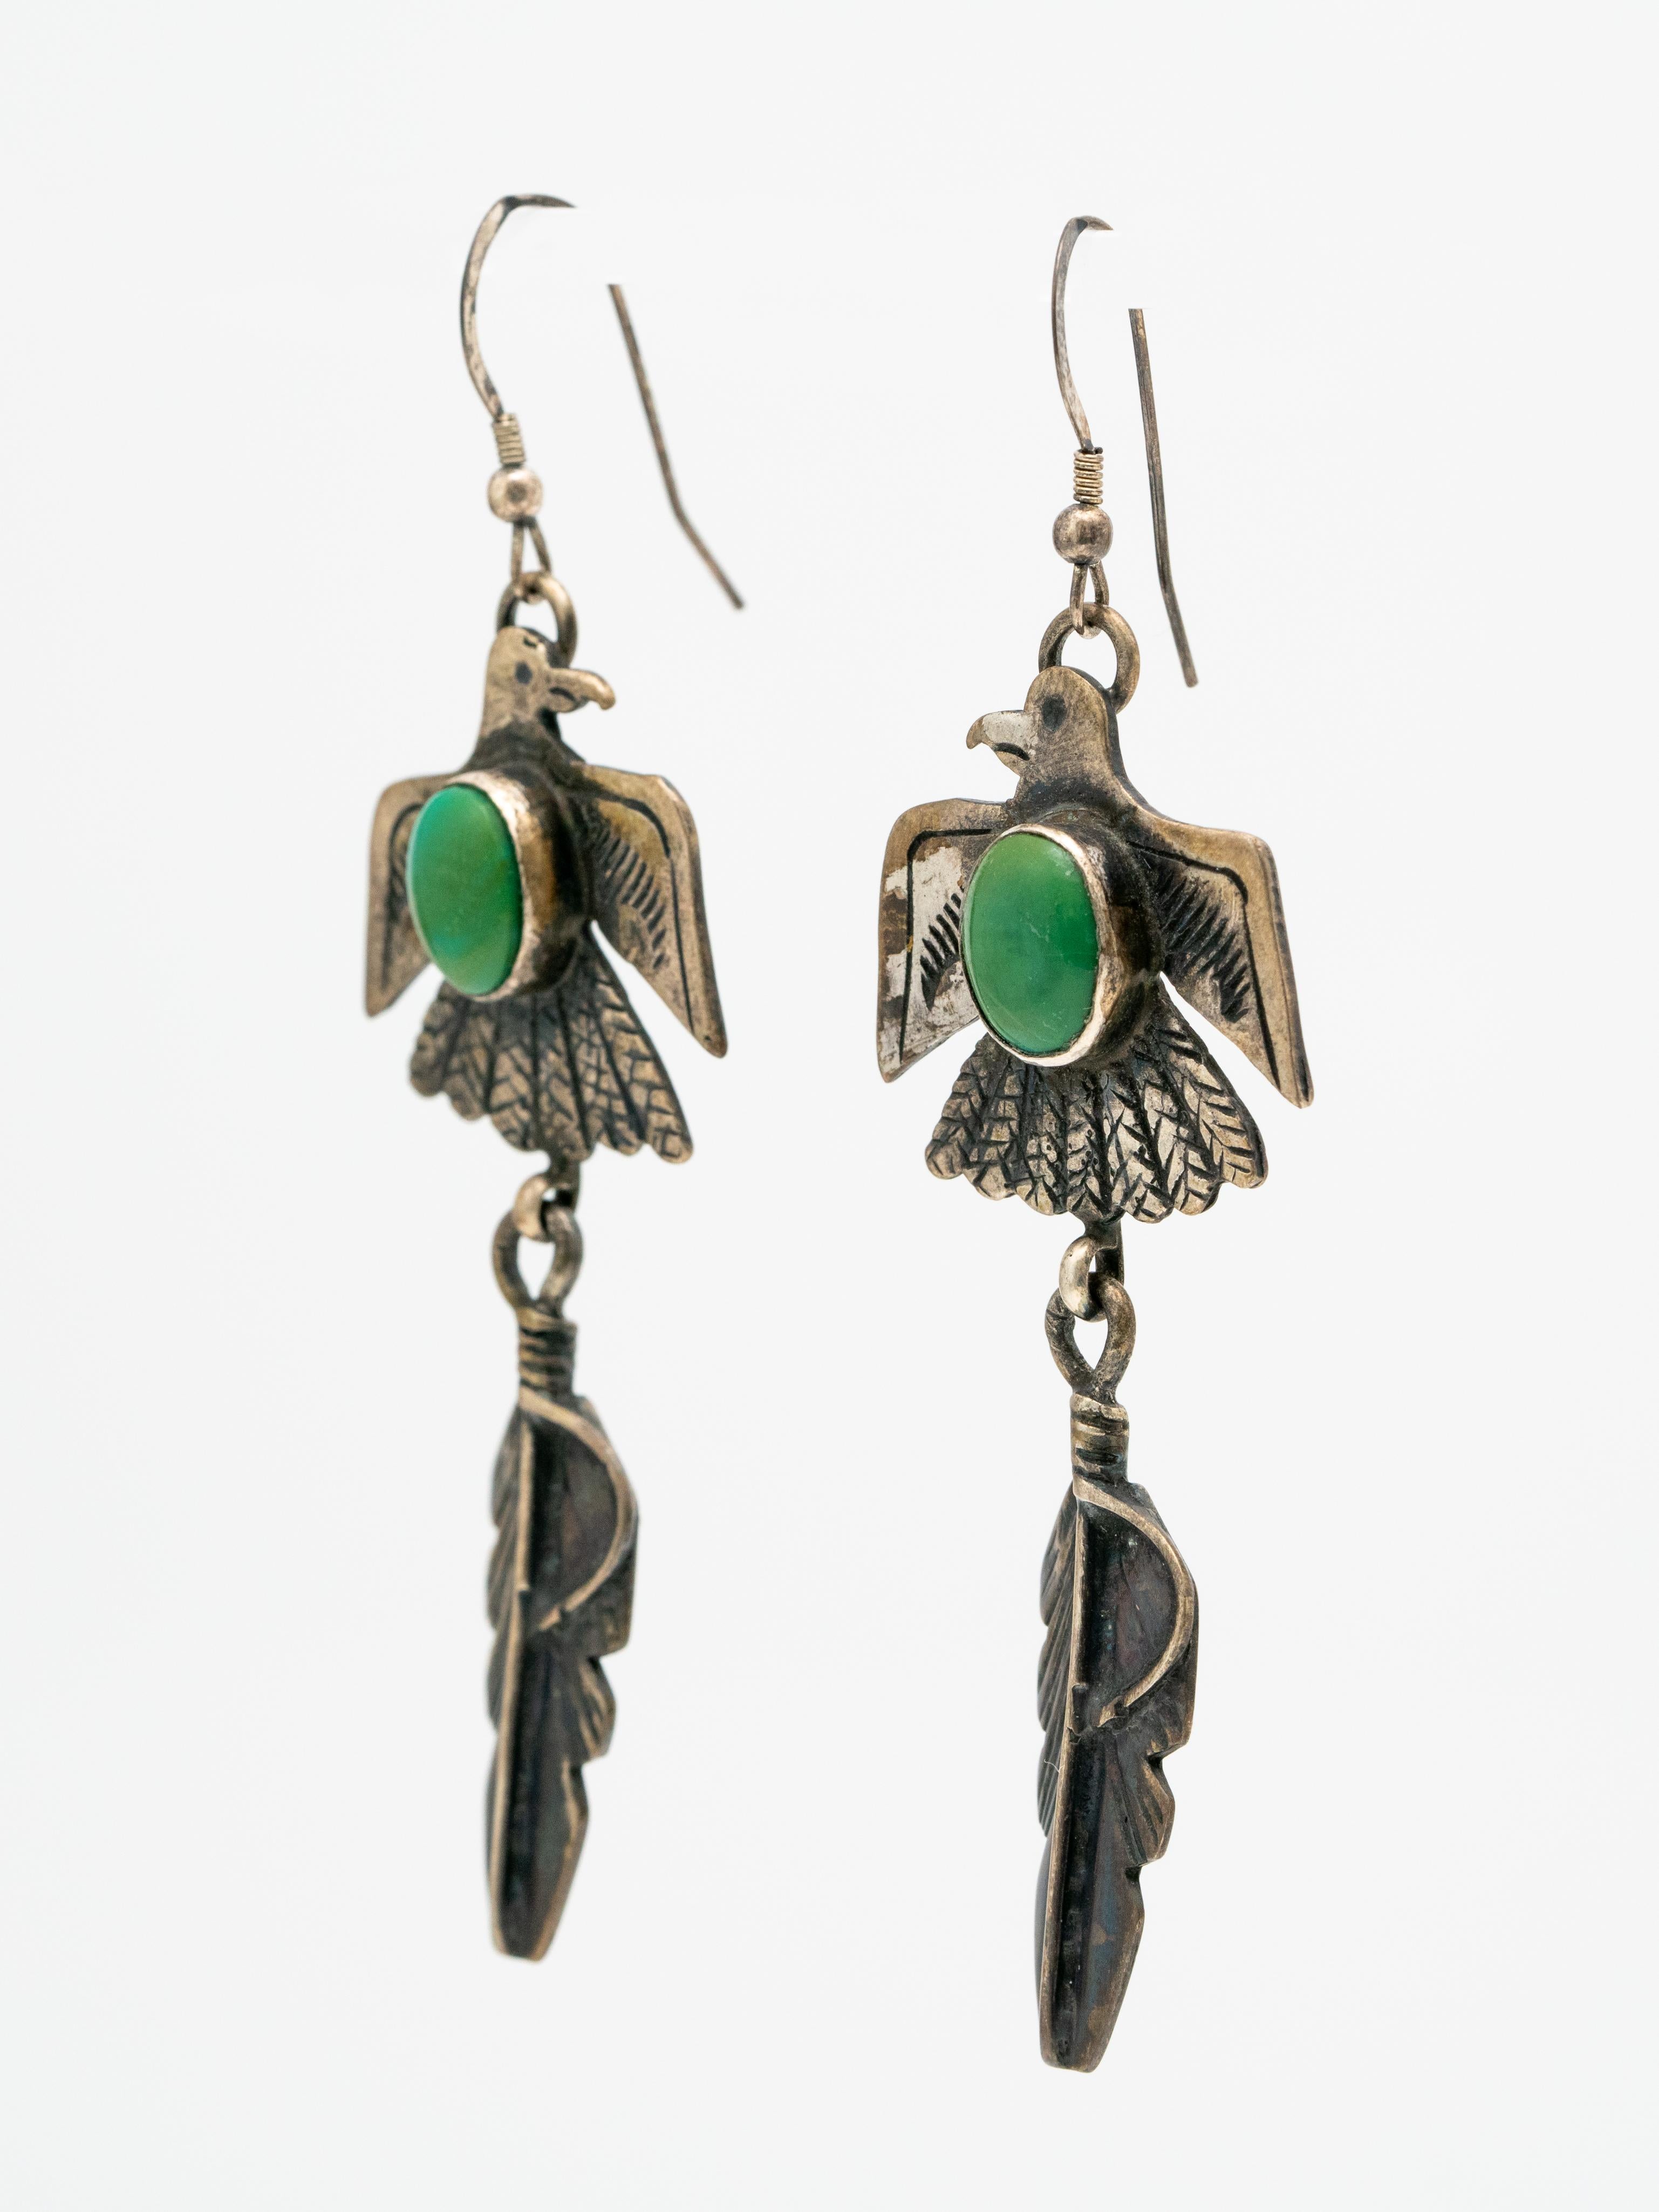 Vintage Native American Navajo Silver and Adventurine Thunderbird and Feather Earrings c.1970s

The Thunderbird is a protective symbol in Navajo jewelry and the feather is healing and offers guidance 

Signed H

Length:76.96mm
Width at widest point: